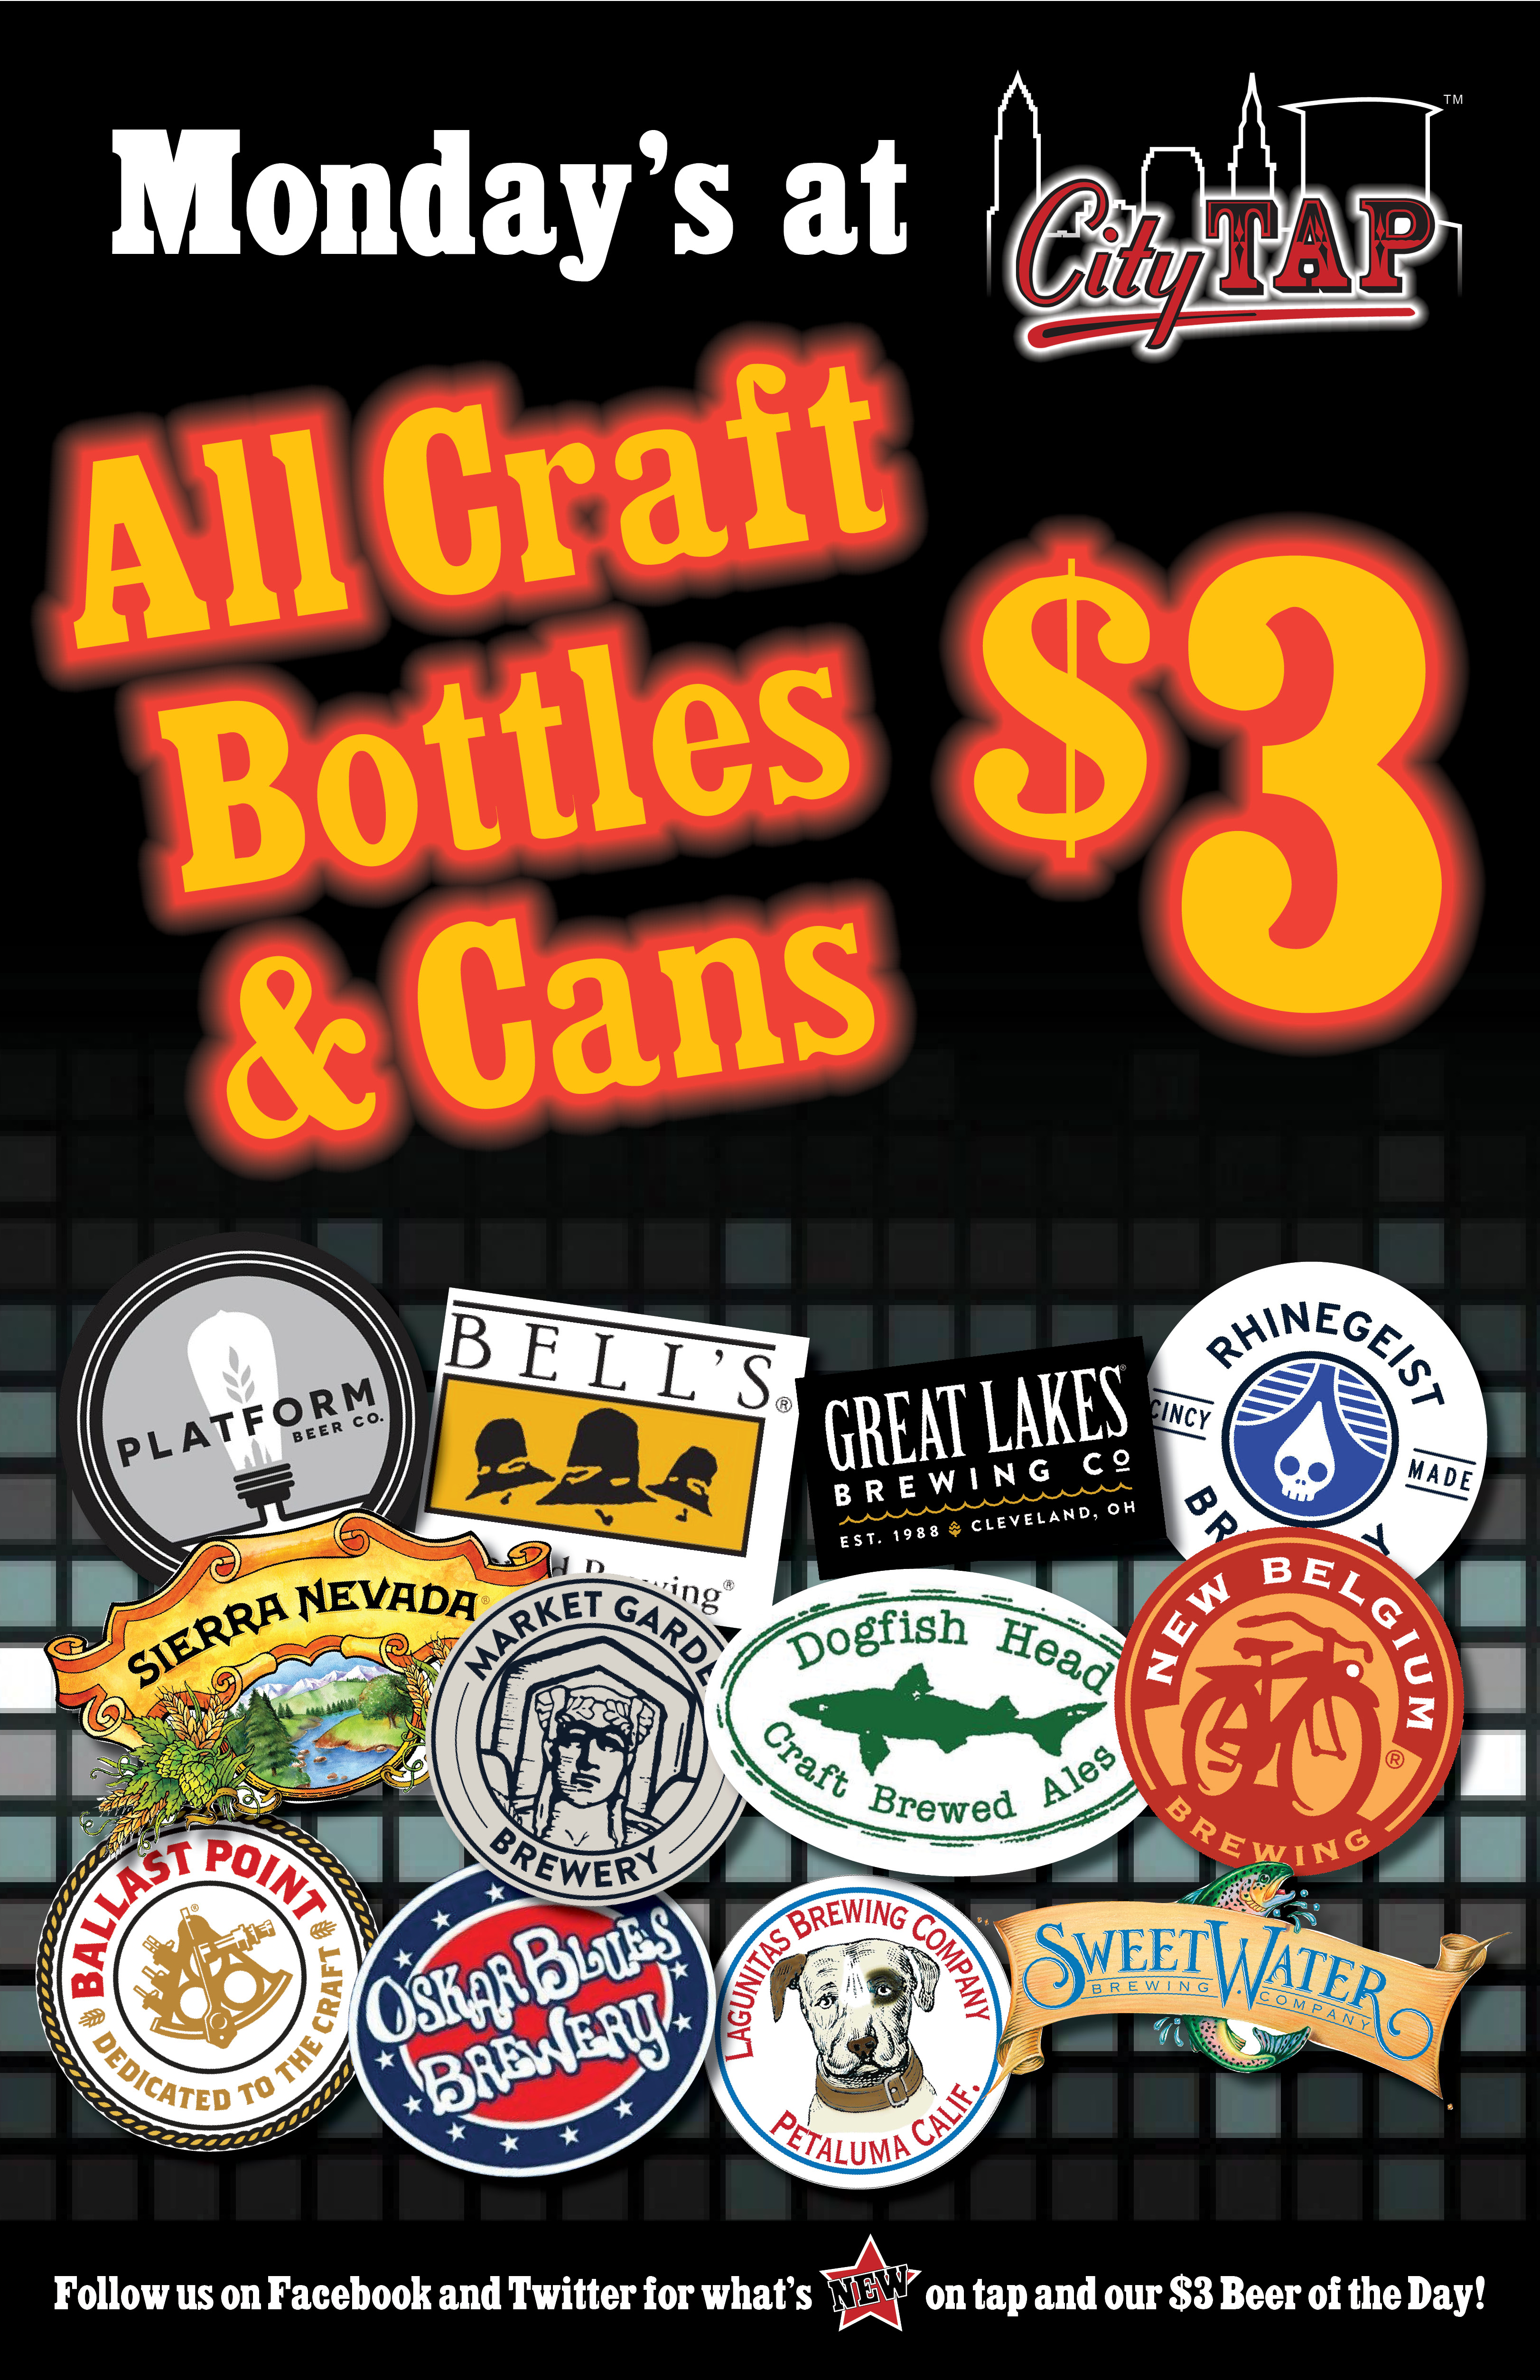 Monday's All Craft Bottles & Cans $3 at City Tap Cleveland